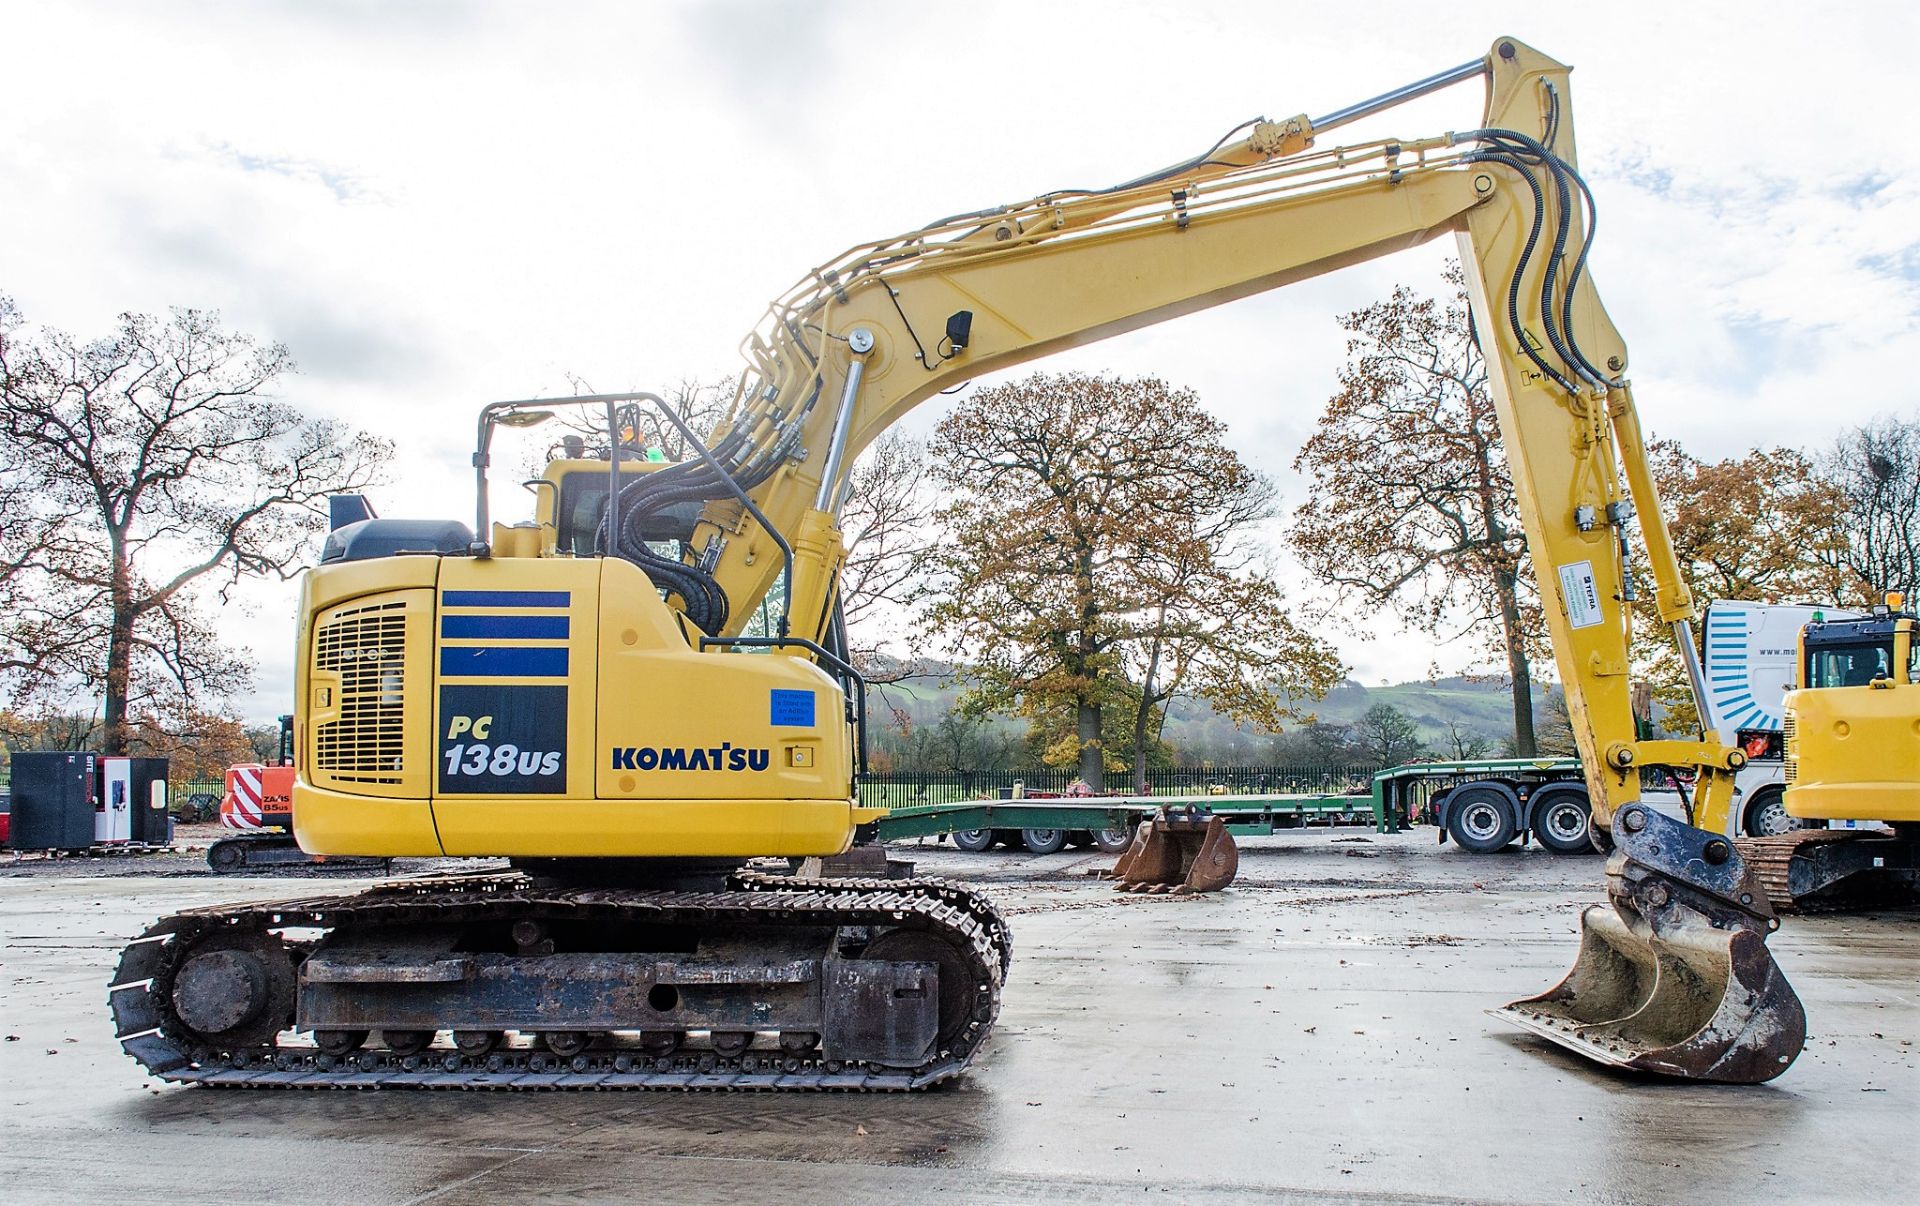 Komatsu PC138US 13 tonne steel tracked excavator Year: 2017 S/N: F50393 Recorded Hours: 3961 3rd - Image 8 of 28